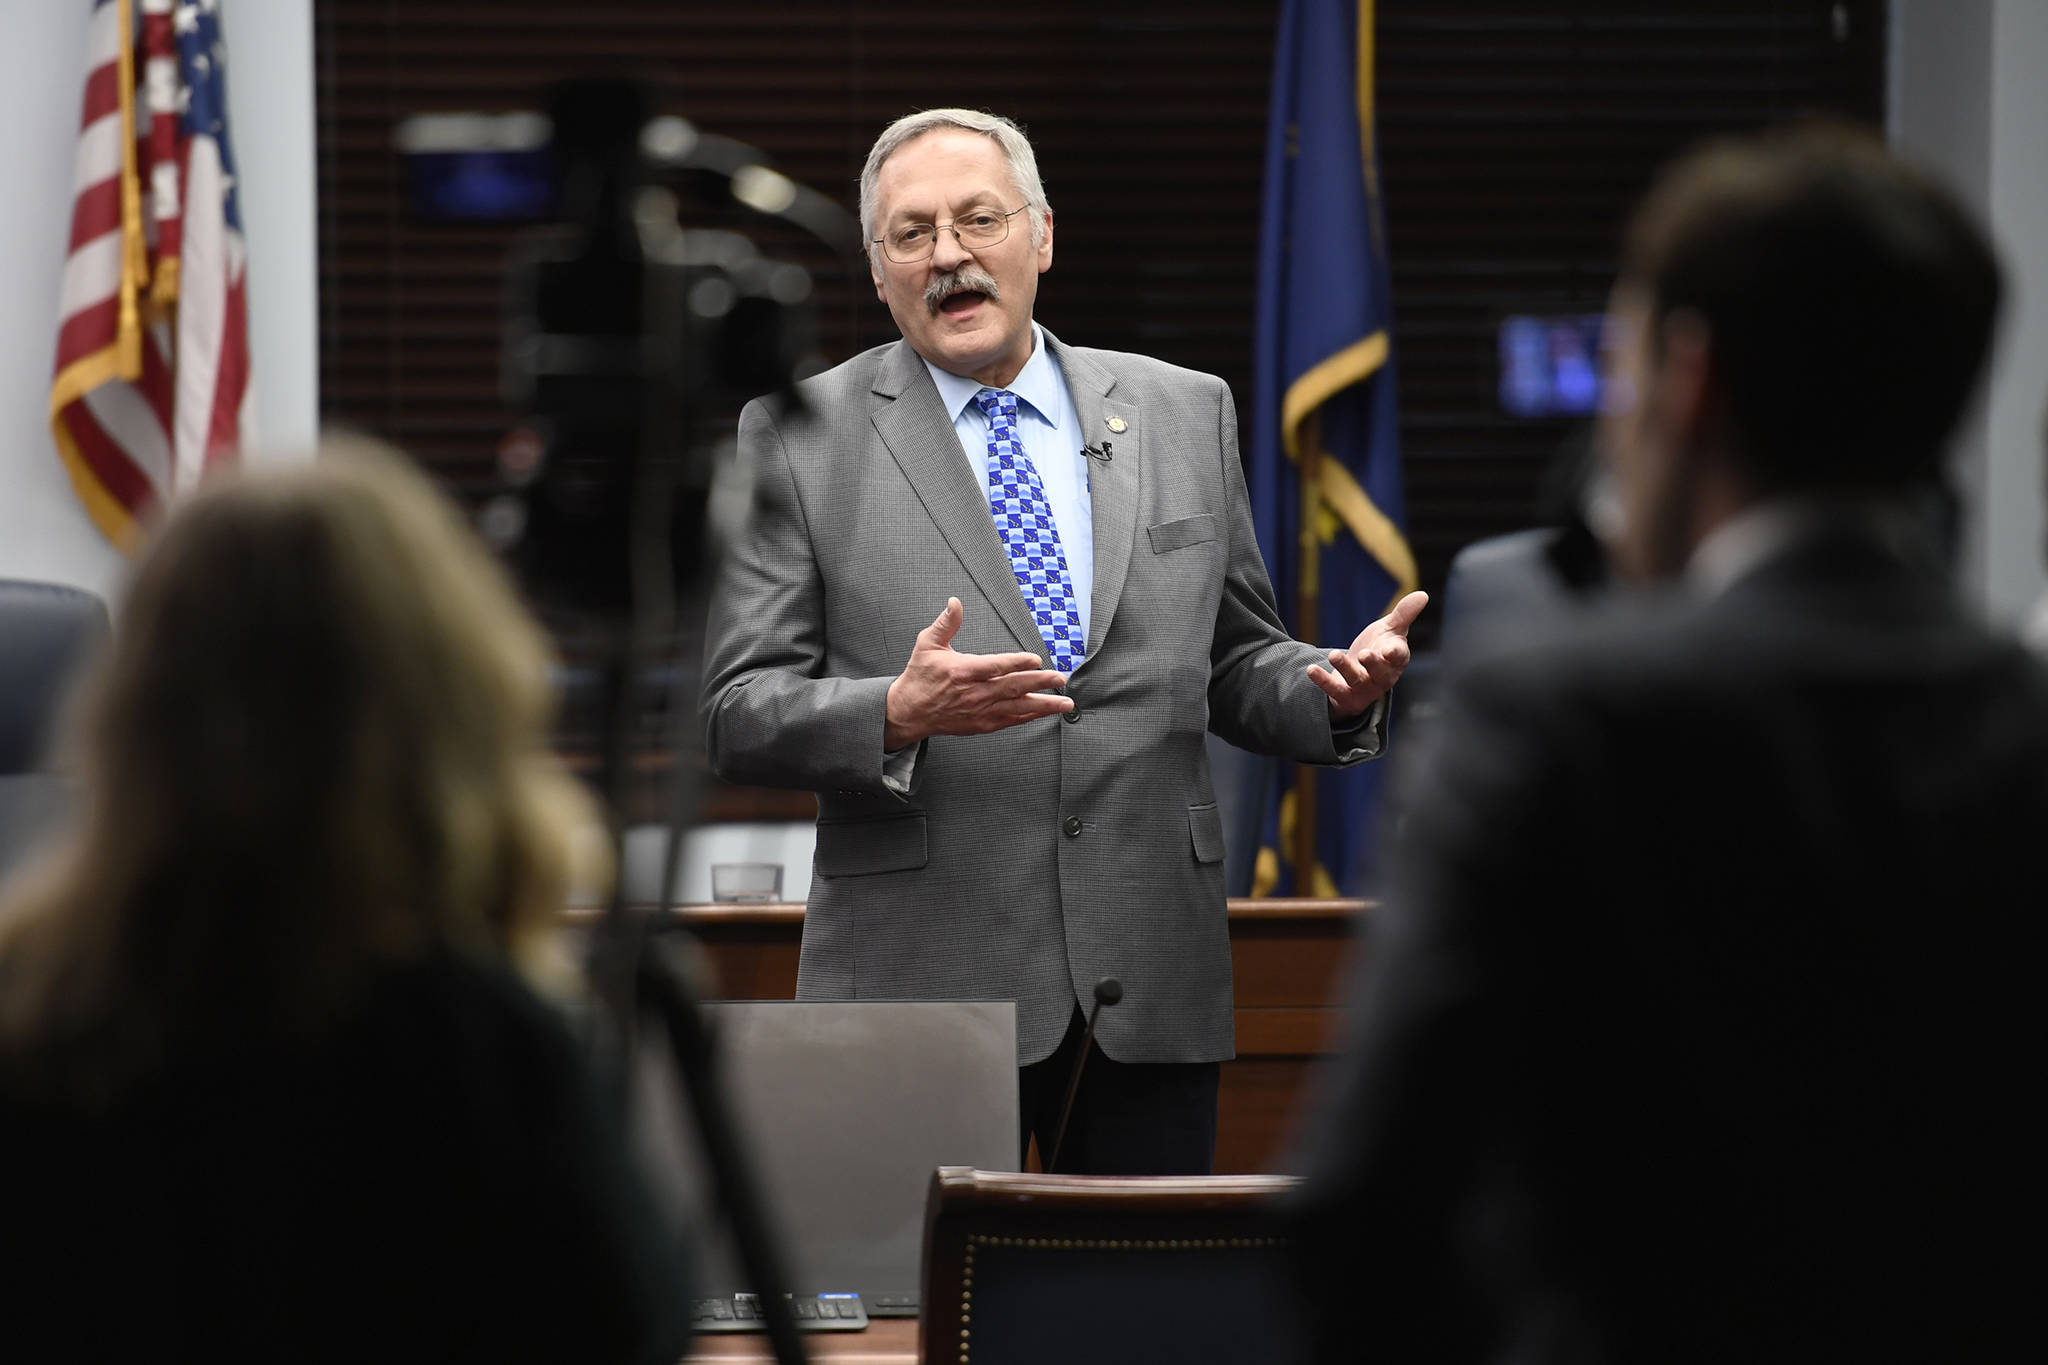 Rep. Dave Talerico, R-Healy, speaks to reporters at the Capitol on Friday, Jan. 25, 2019. (Michael Penn | Juneau Empire)